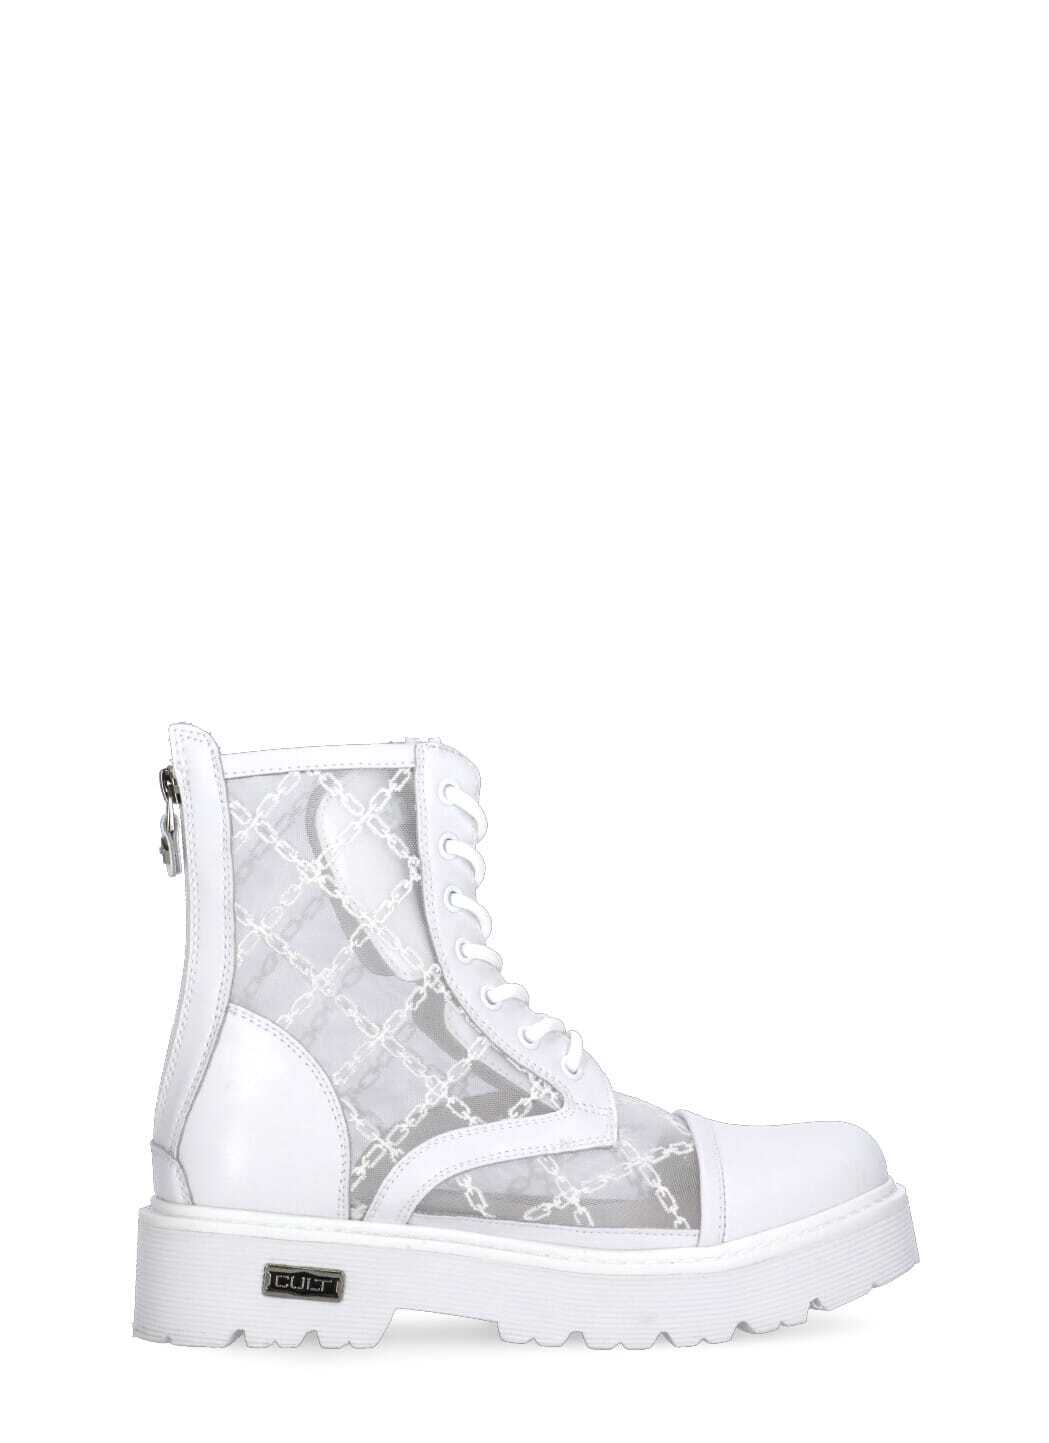 Cult Slash 3403 Boots in white